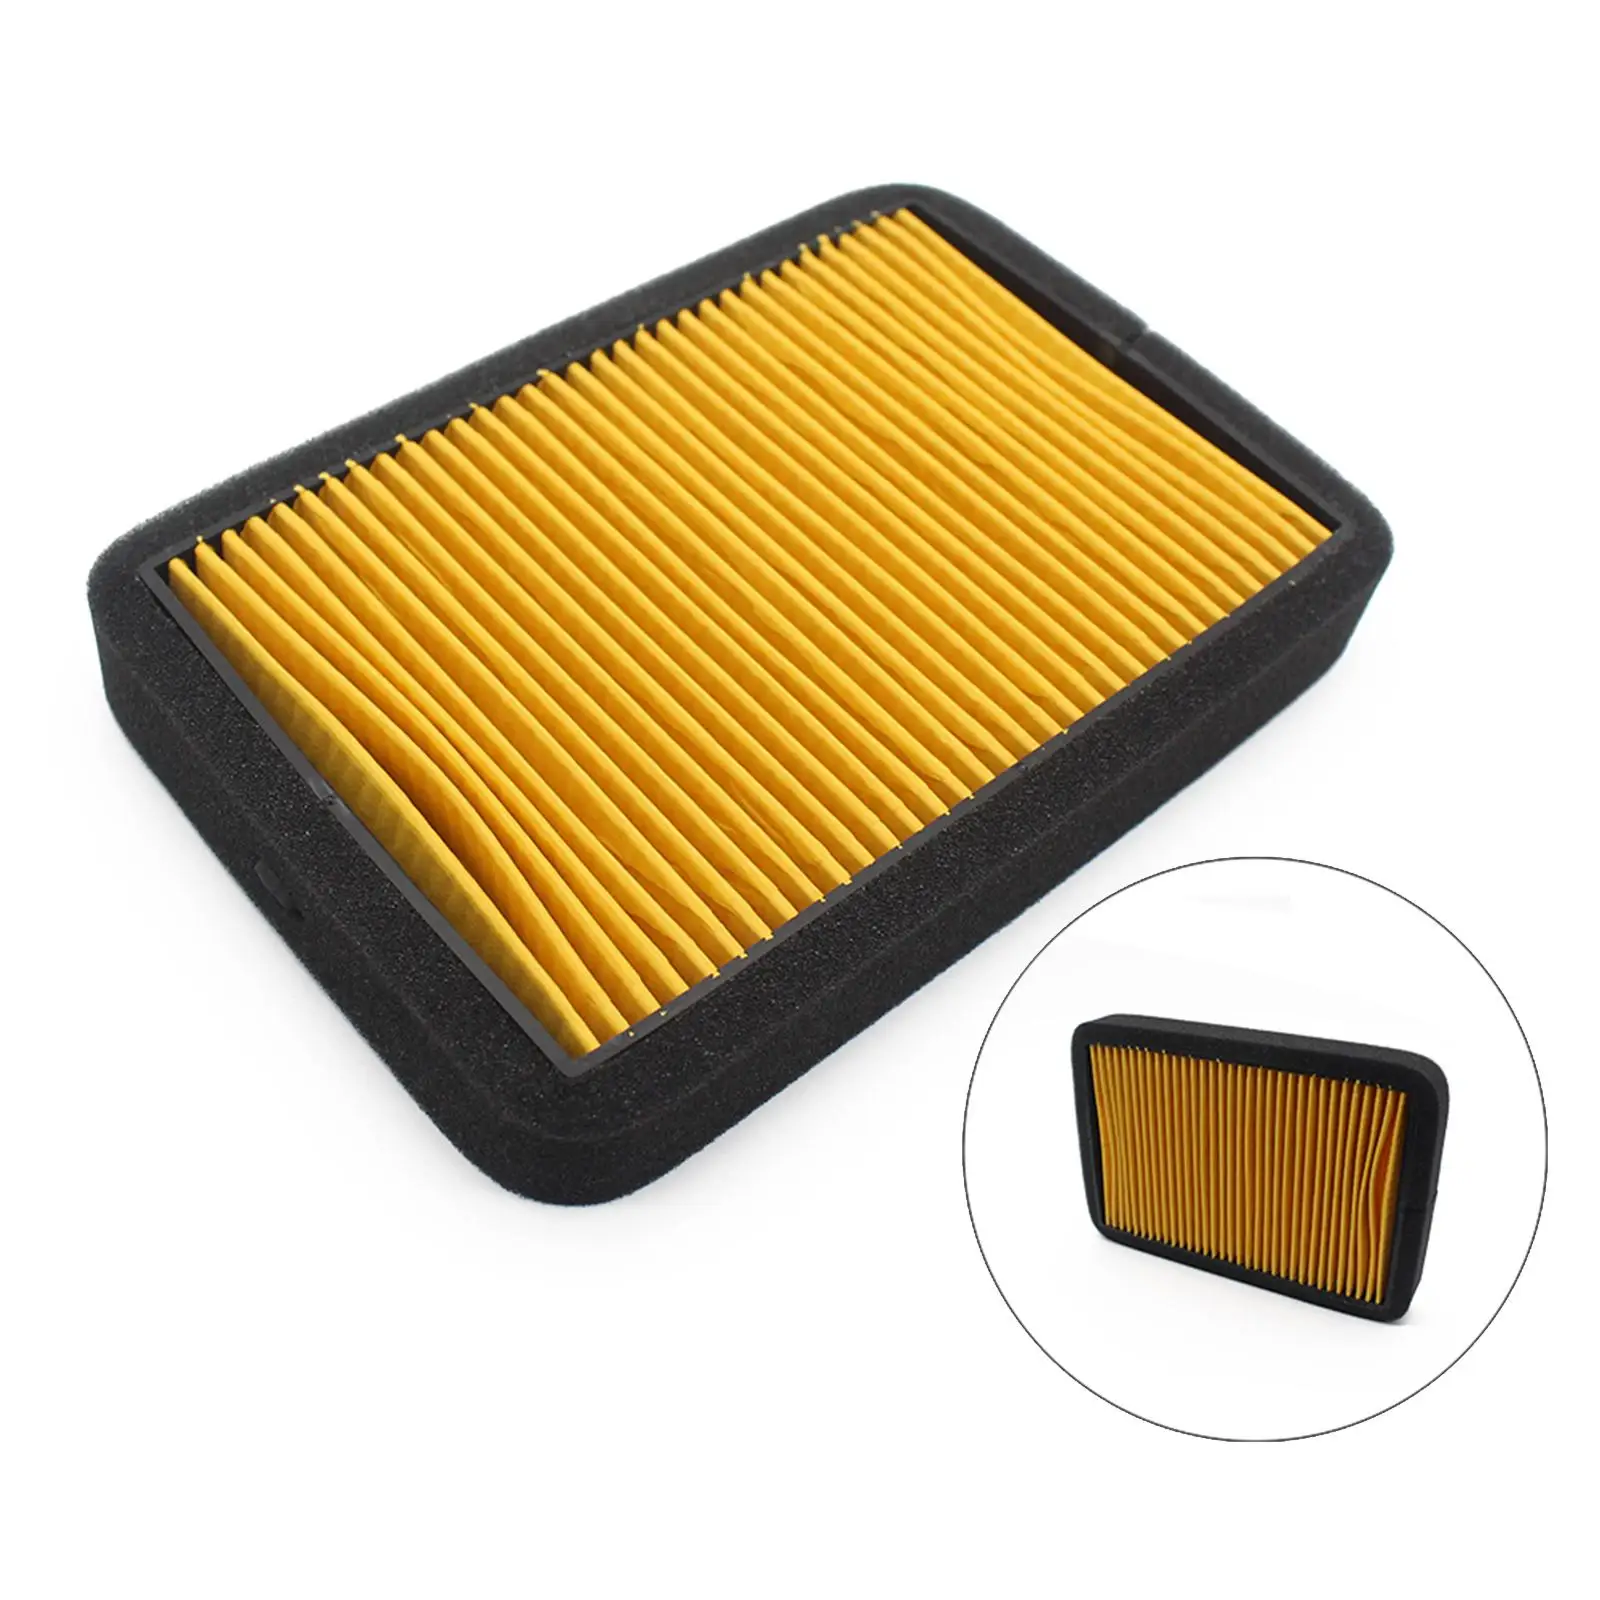 Air Filter Cleaner Bj150-29A-29B Fits for 150cc 500cc Tnt150 Durable